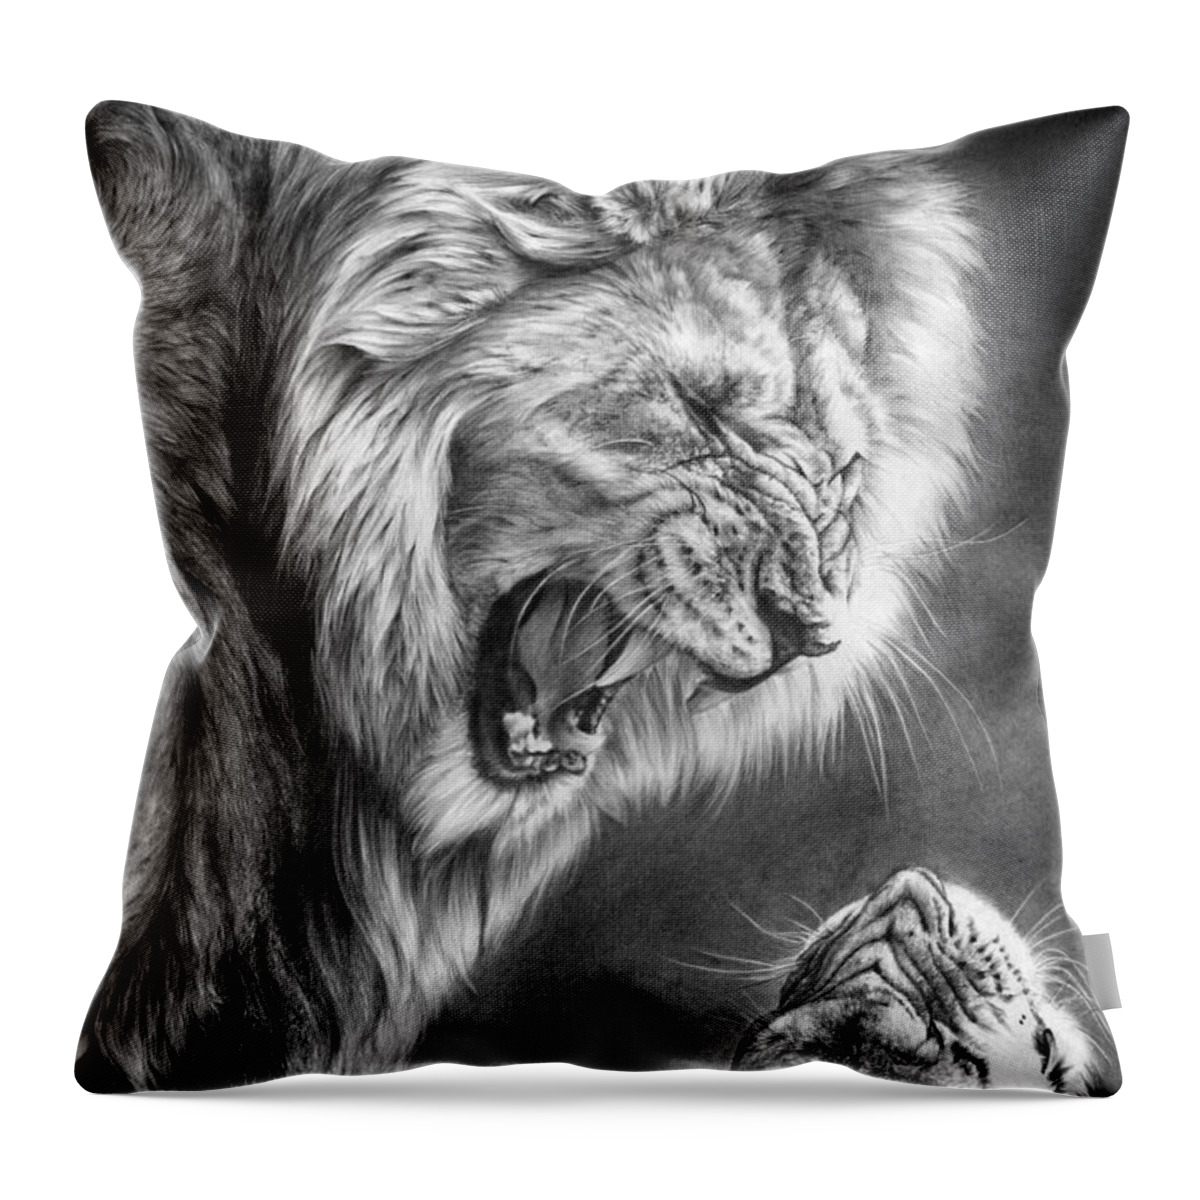 Lion Throw Pillow featuring the drawing Heat Of The Night by Peter Williams